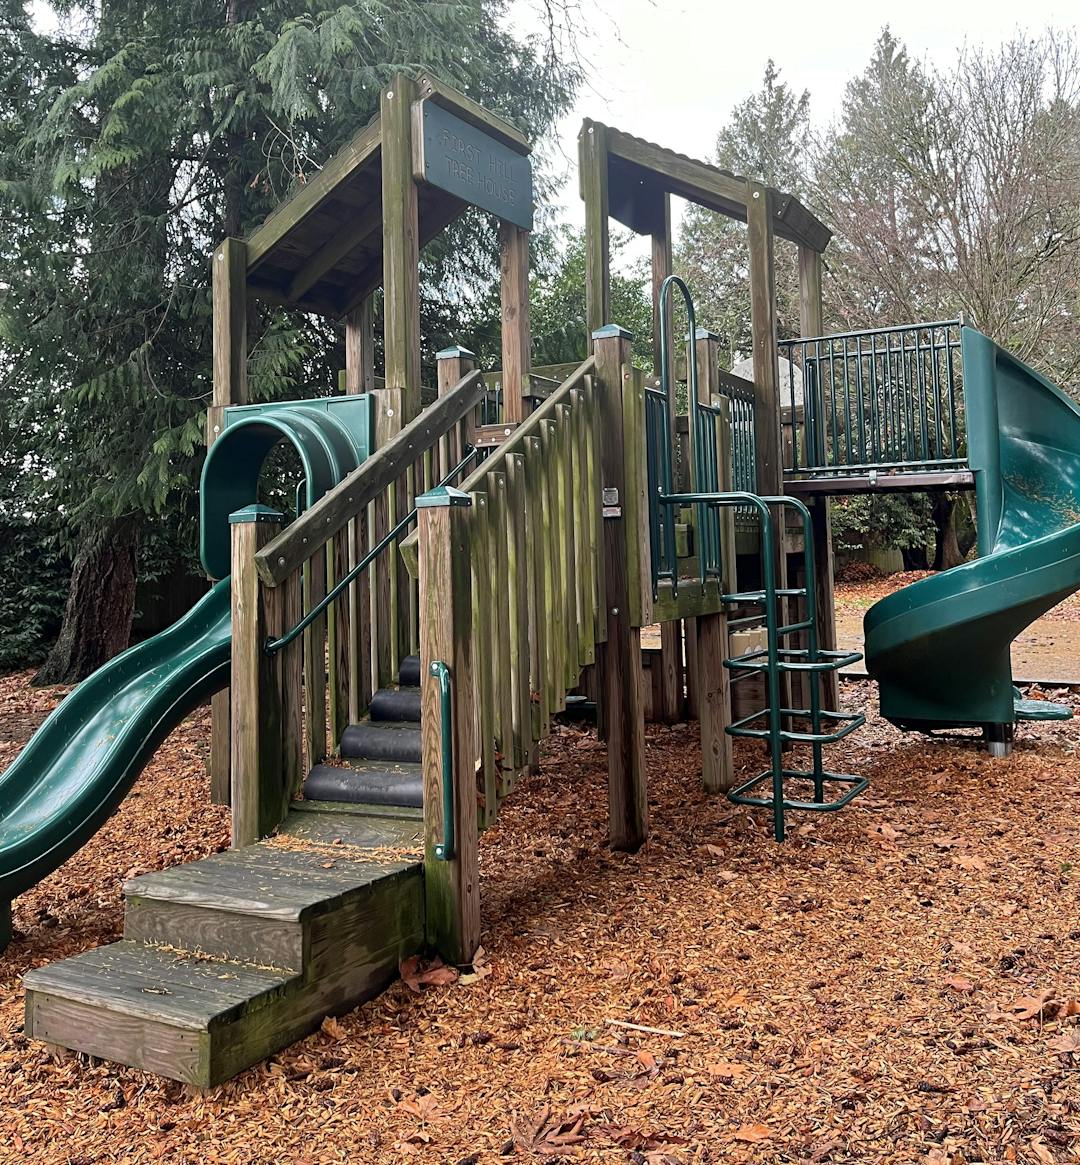 A treehouse play structure with two green slides photographed on an overcast fall day in the Pacific Northwest